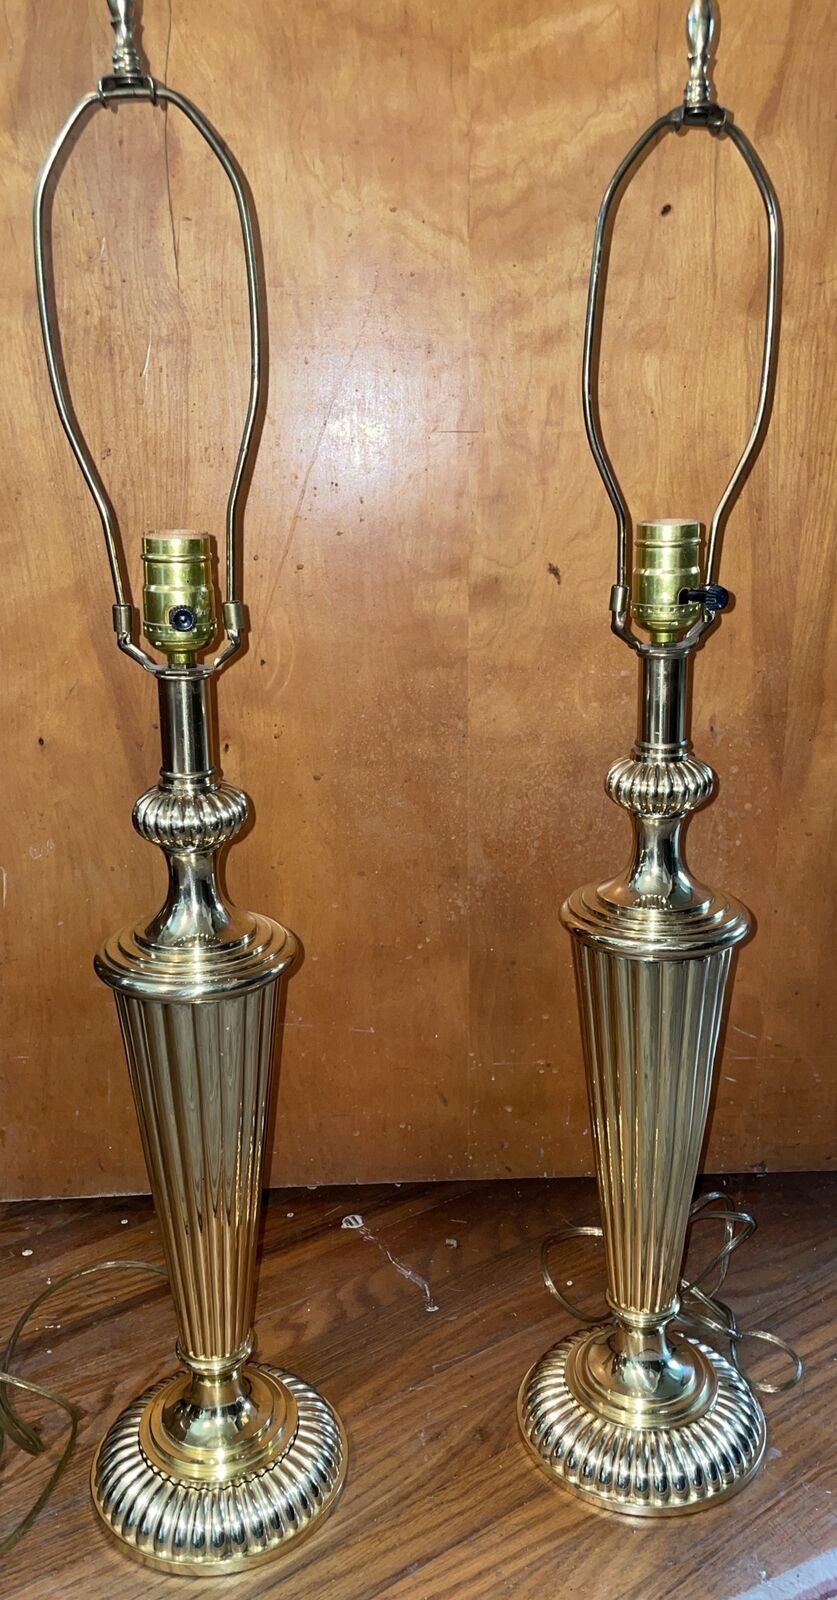 Vintage Shiny  Heavy Brass Table Lamps, Classic Coil Holder LOOK BRAND NEW